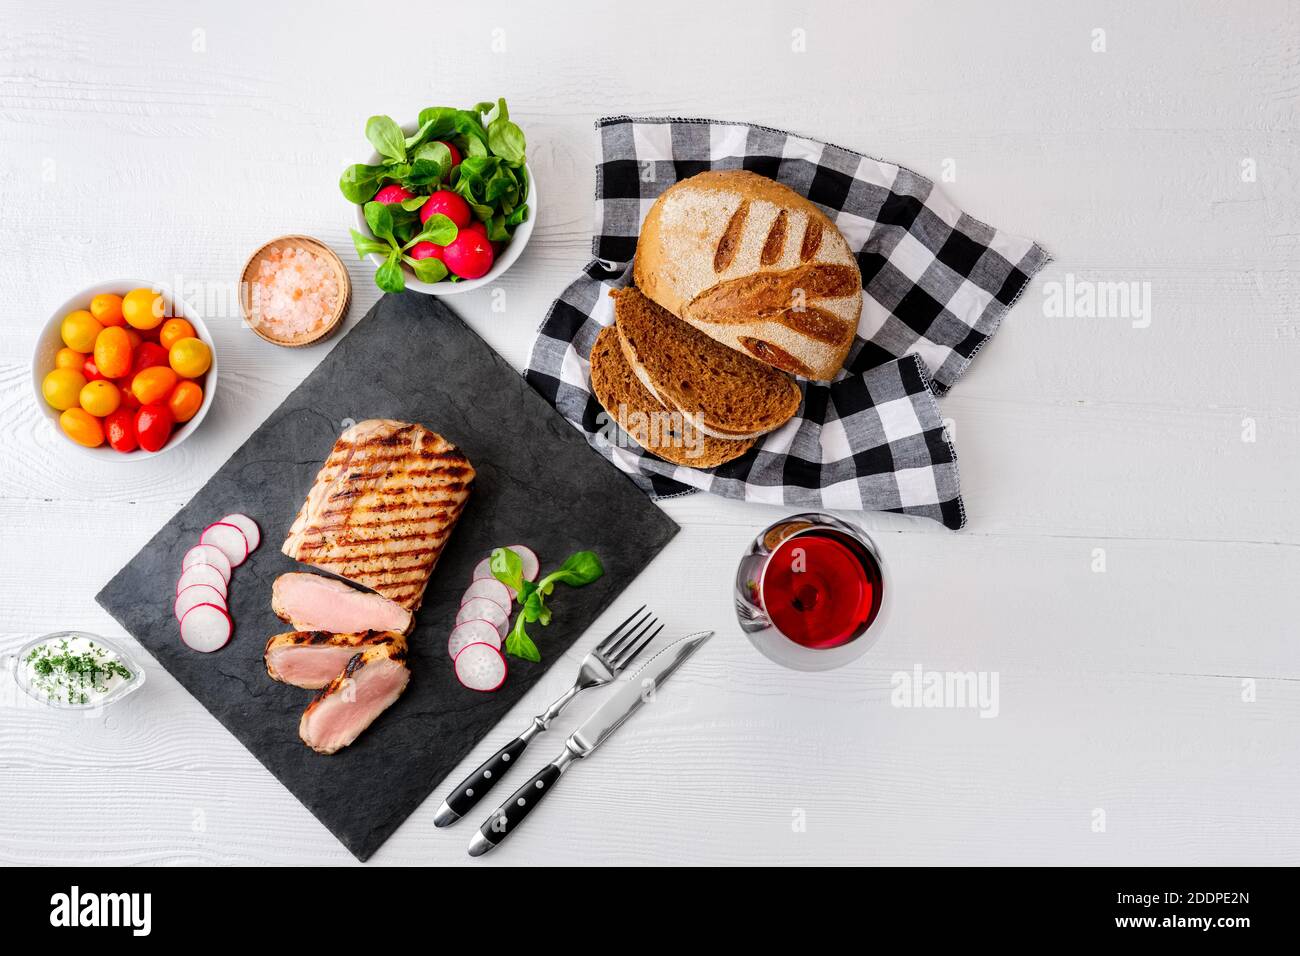 Sliced grilled roast beef with fork and knife on stone serving board. Top view with copy space for your text. Stock Photo